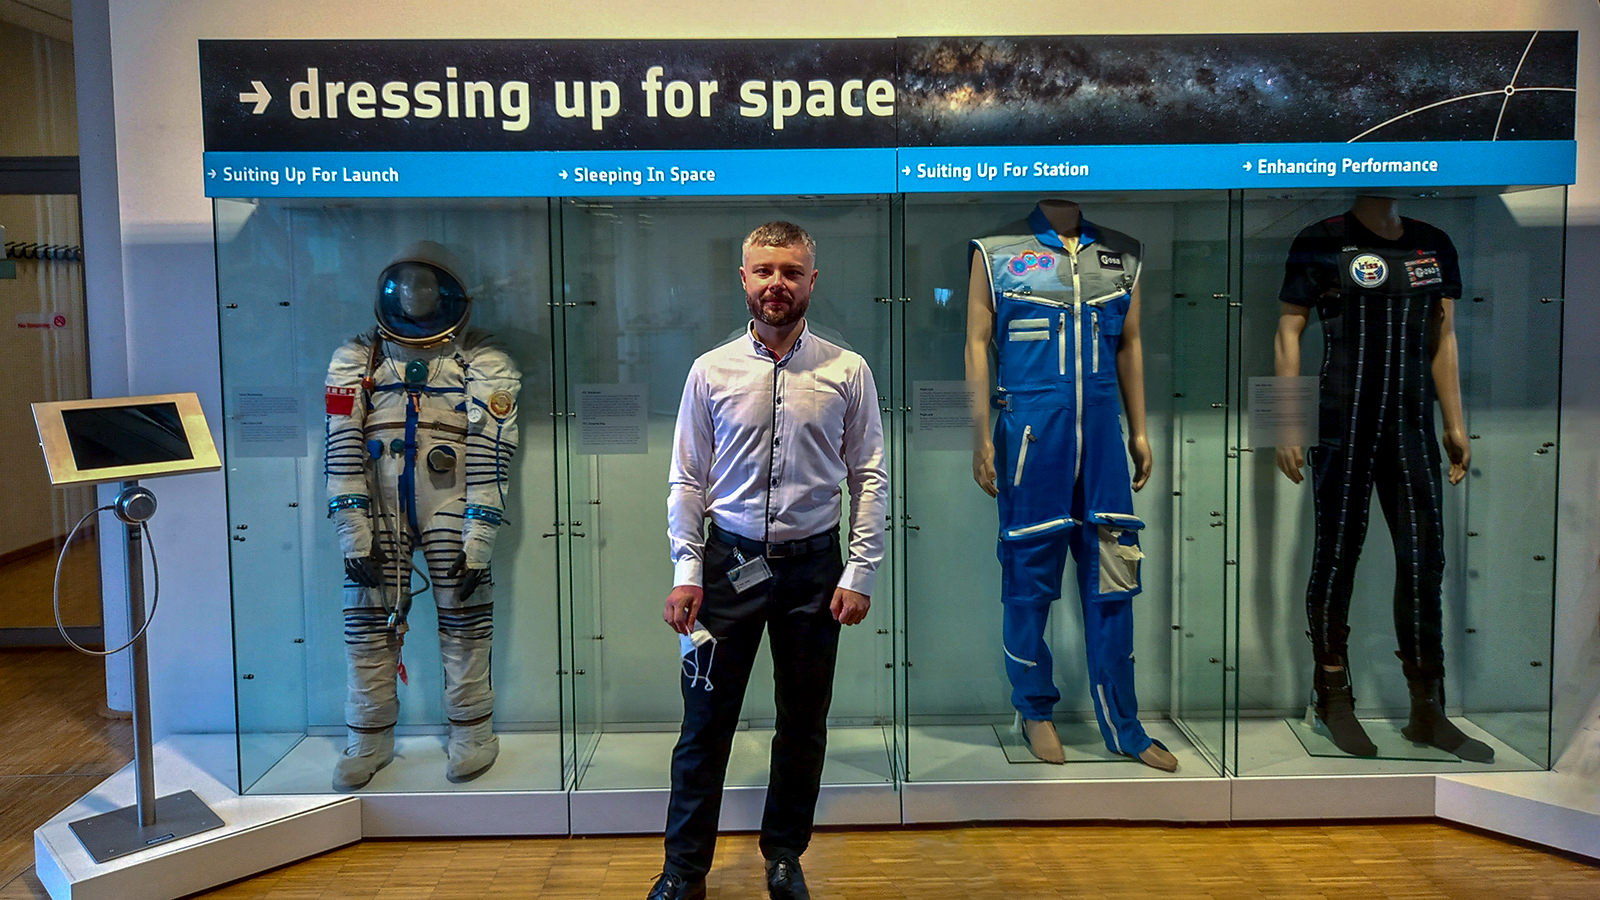 The Orthopaedic Expert might be the Next Hungarian Astronaut